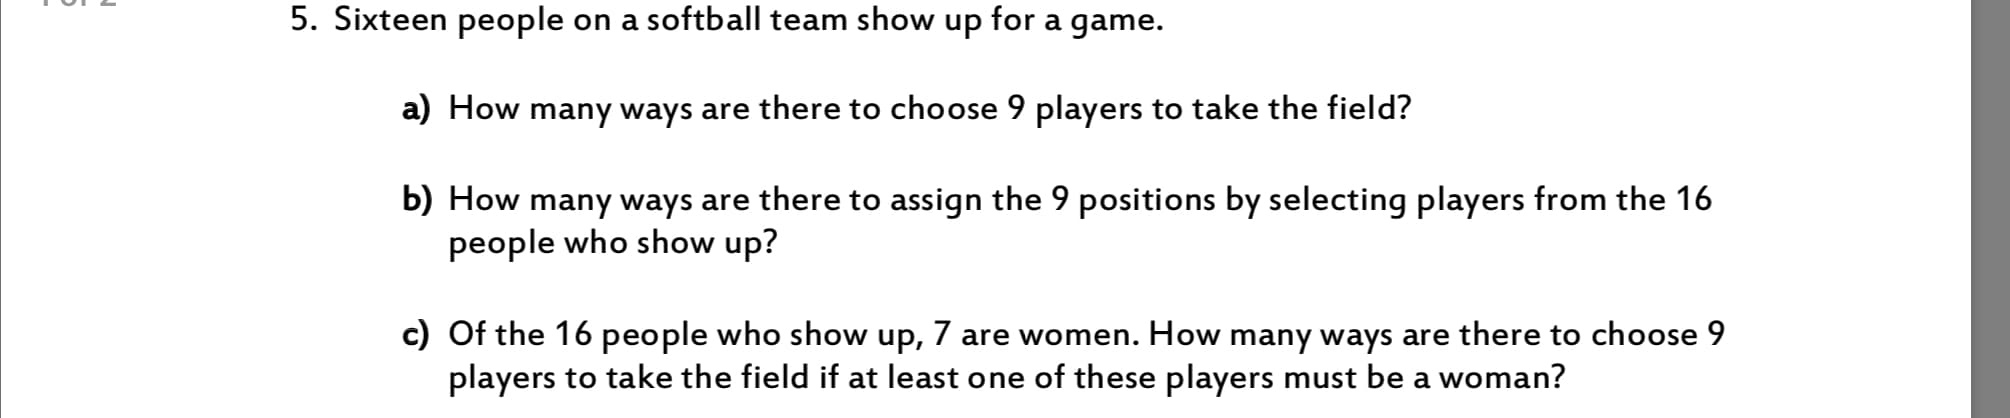 5. Sixteen people
on a softball team show up for a game.
a) How many ways are there to choose 9 players to take the field?
b) How many ways are there to assign the 9 positions by selecting players from the 16
people who show up?
c) Of the 16 people who show up, 7 are women. How many ways are there to choose 9
players to take the field if at least one of these players must be a woman?
